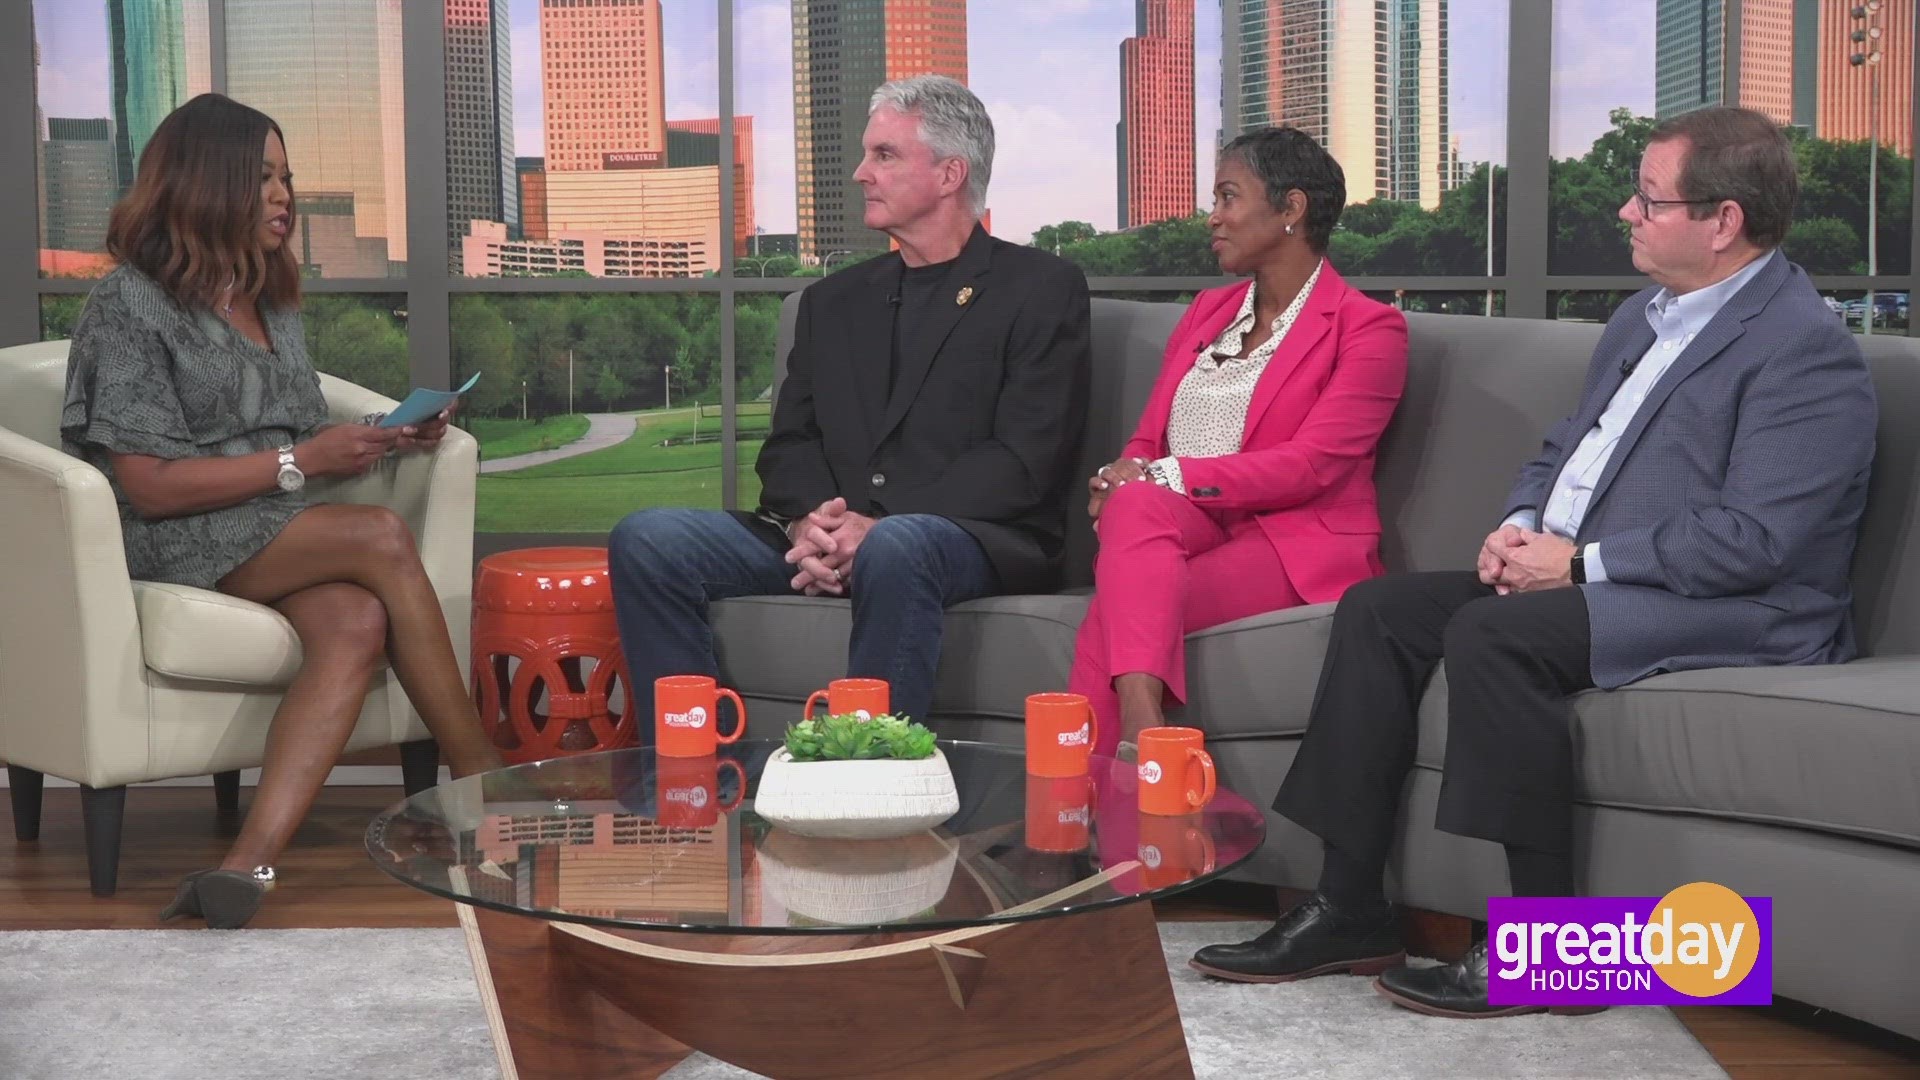 A Private Investigator, Family Attorney & Director of Pastoral Ministries at Second Baptist Church join Great Day to answer viewers' questions about marriage.